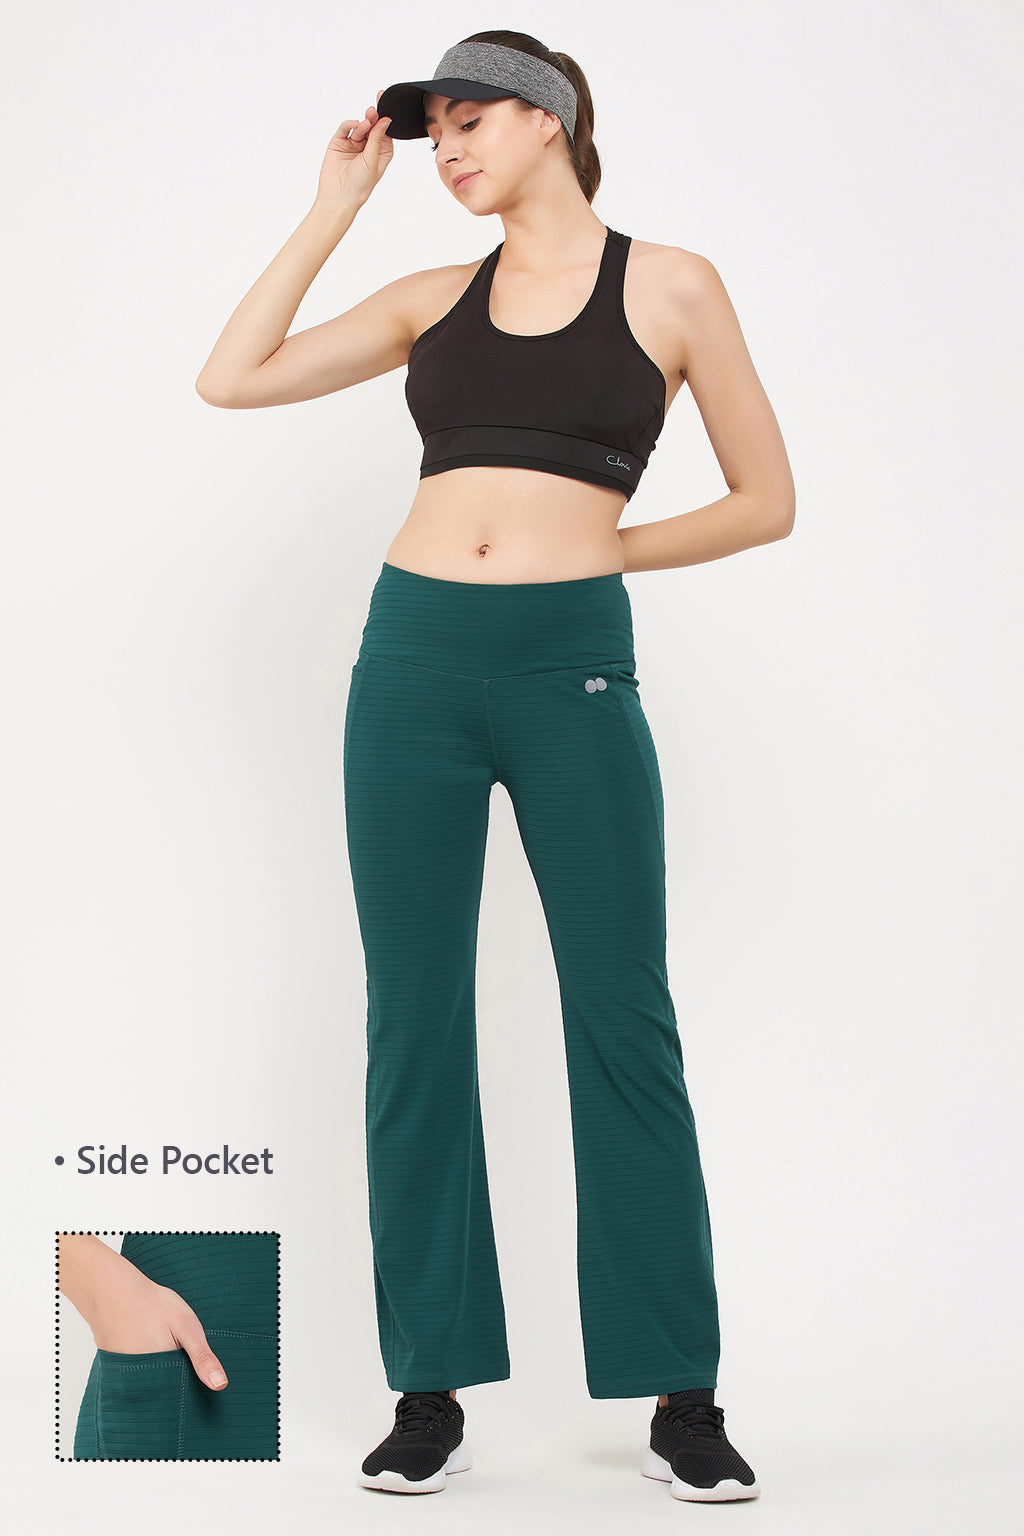 Comfort Fit High Waist Flared Yoga Pants in Teal Green with Side Pocke –  Tradyl